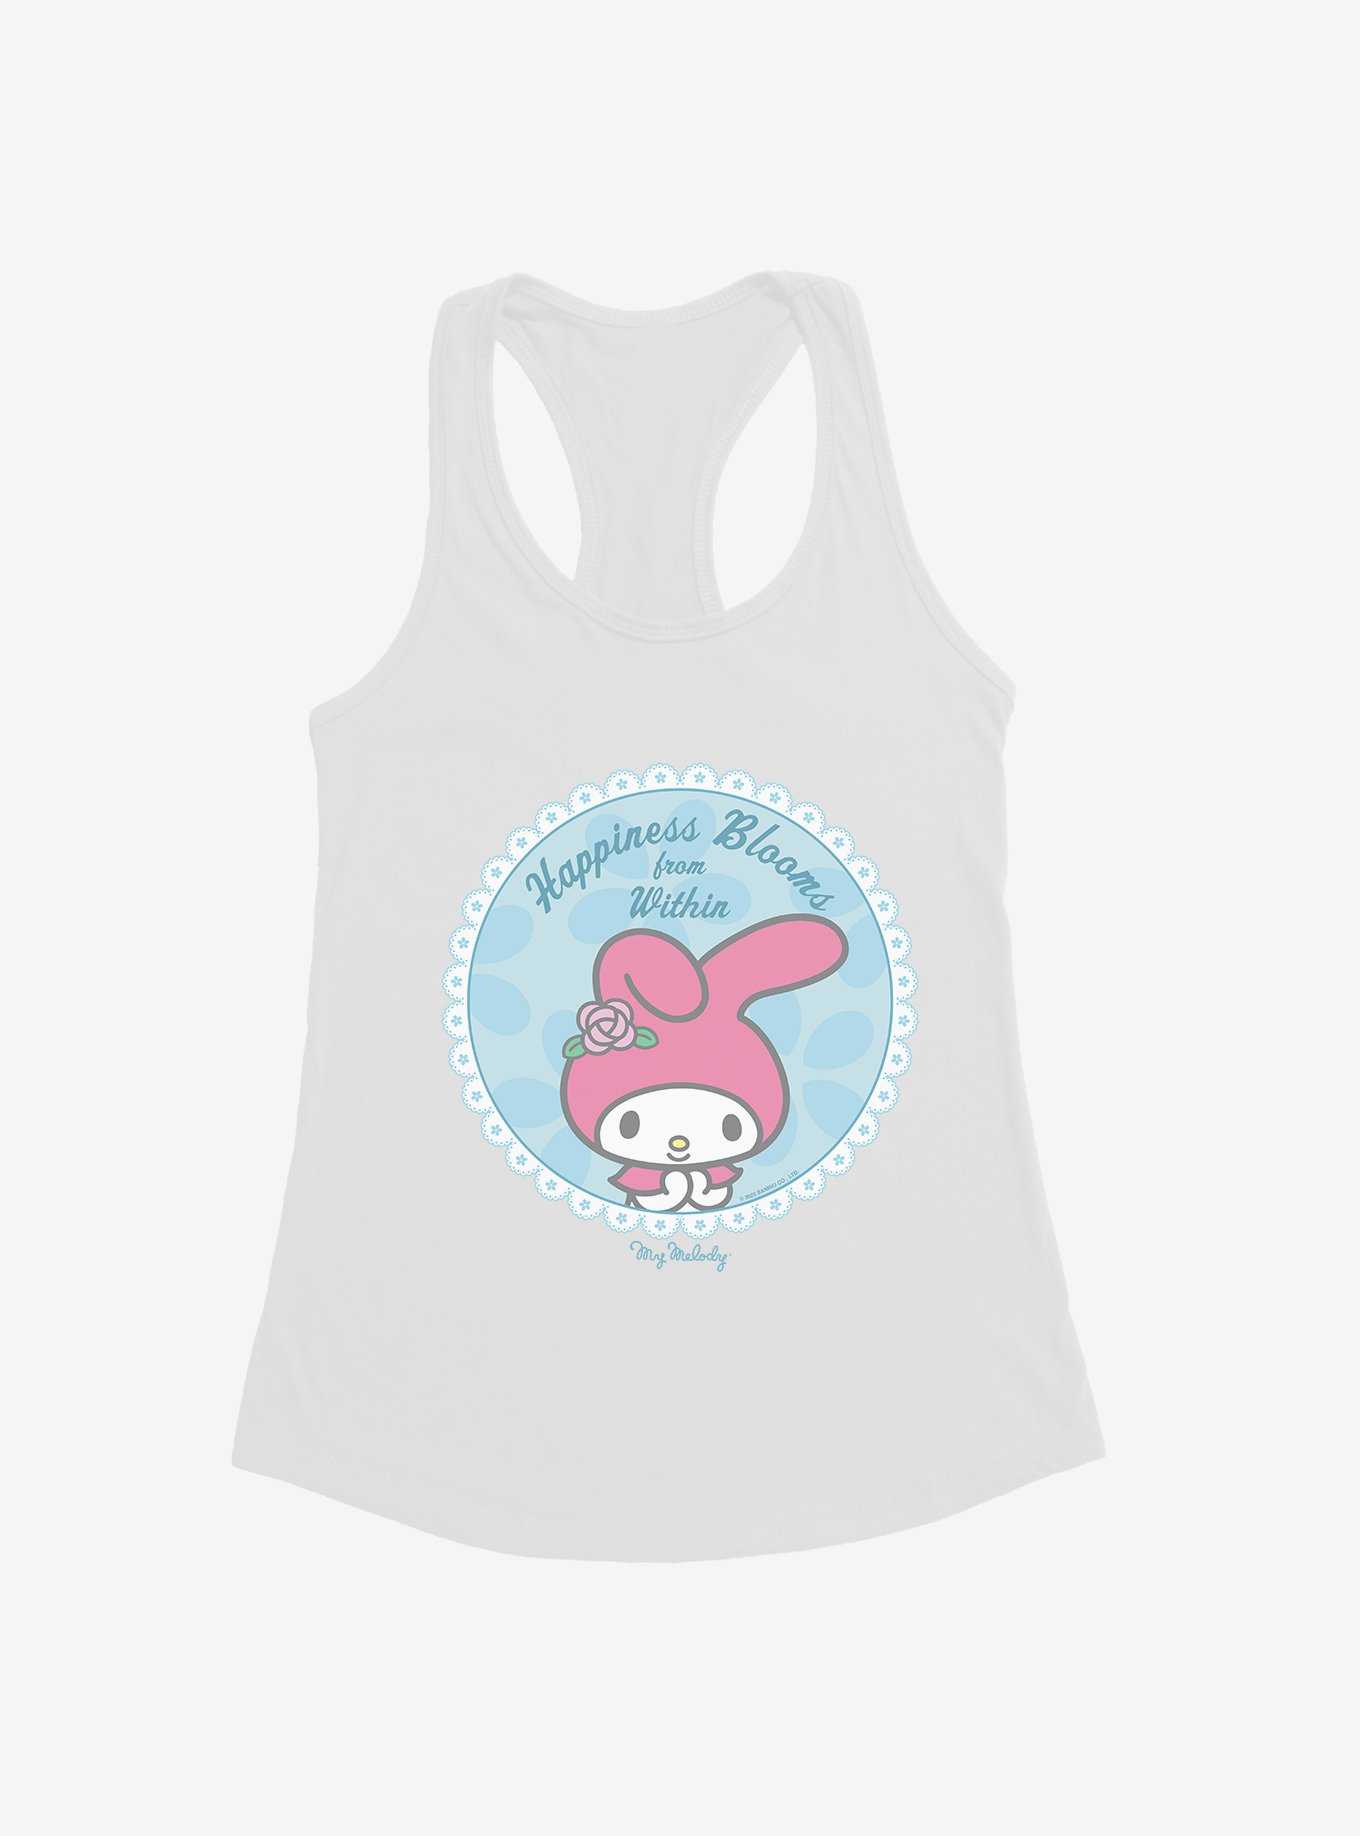 My Melody Happiness Blooms From Within Womens Tank Top, , hi-res